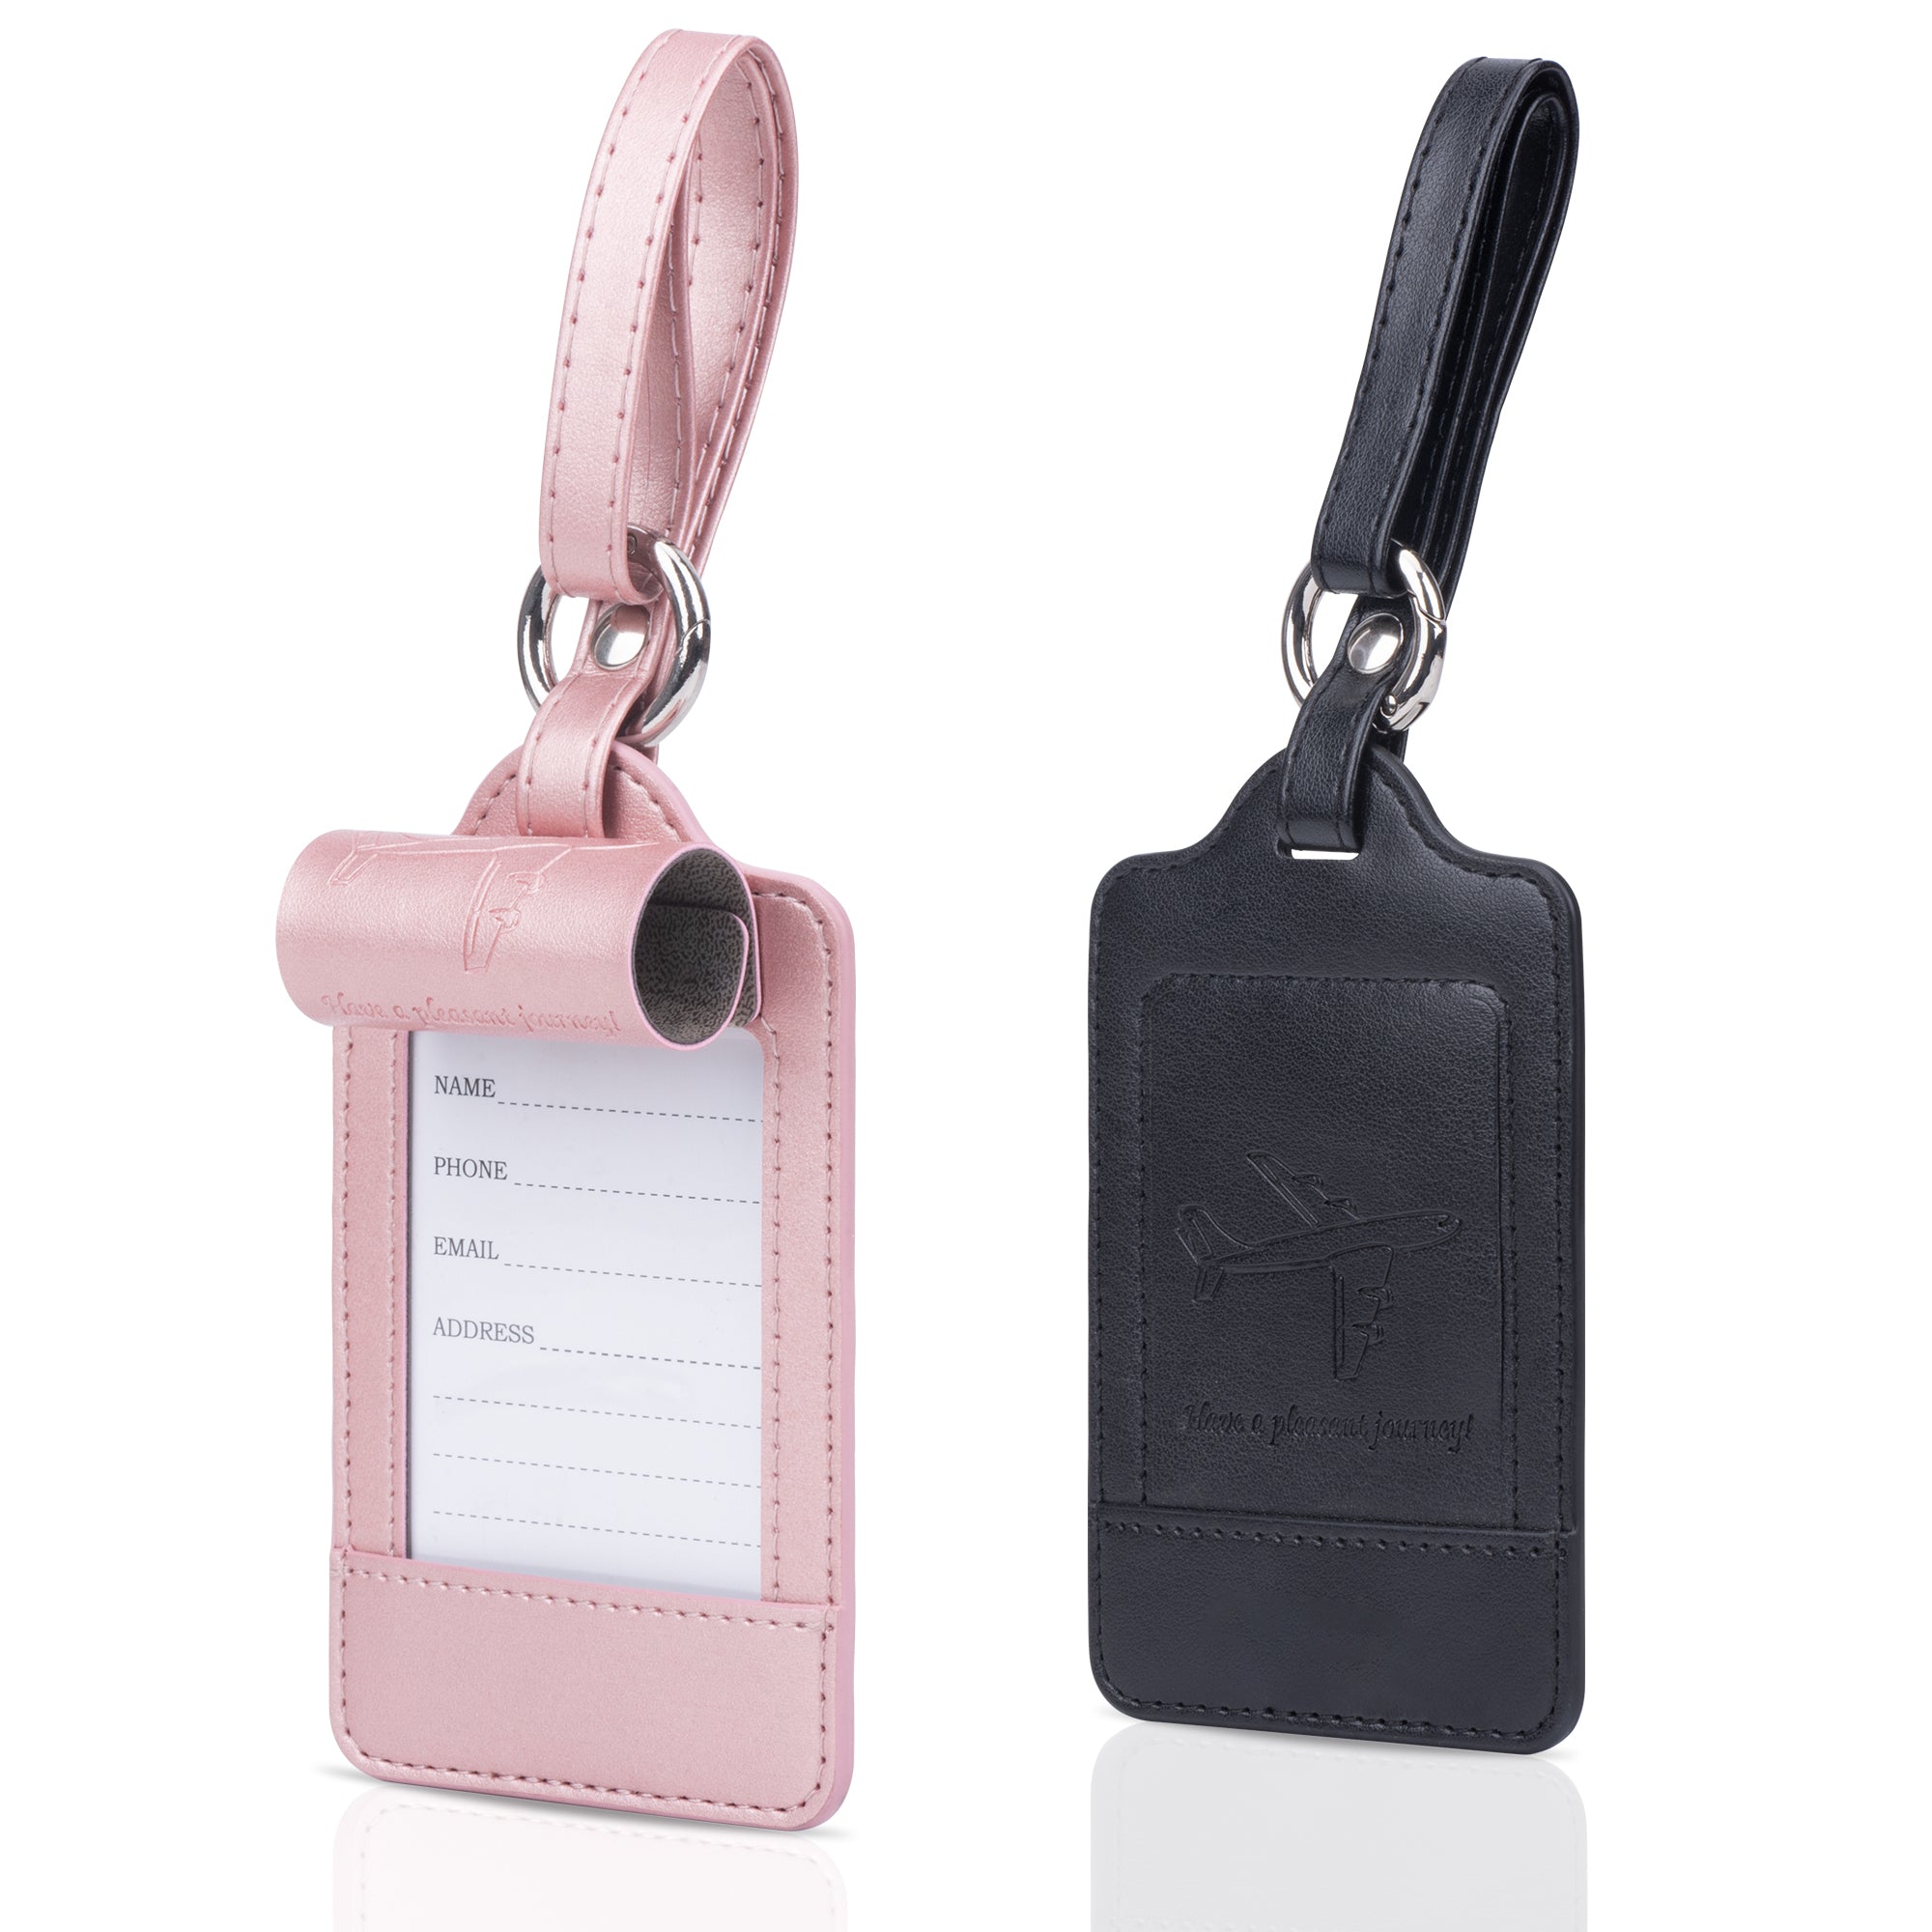  Rectangle PU Leather Luggage Tag Name Tag Bag Tag for Travel  Suitcase Baggage Luggage (4.05 x 2.83 inches) RE64 : Clothing, Shoes &  Jewelry